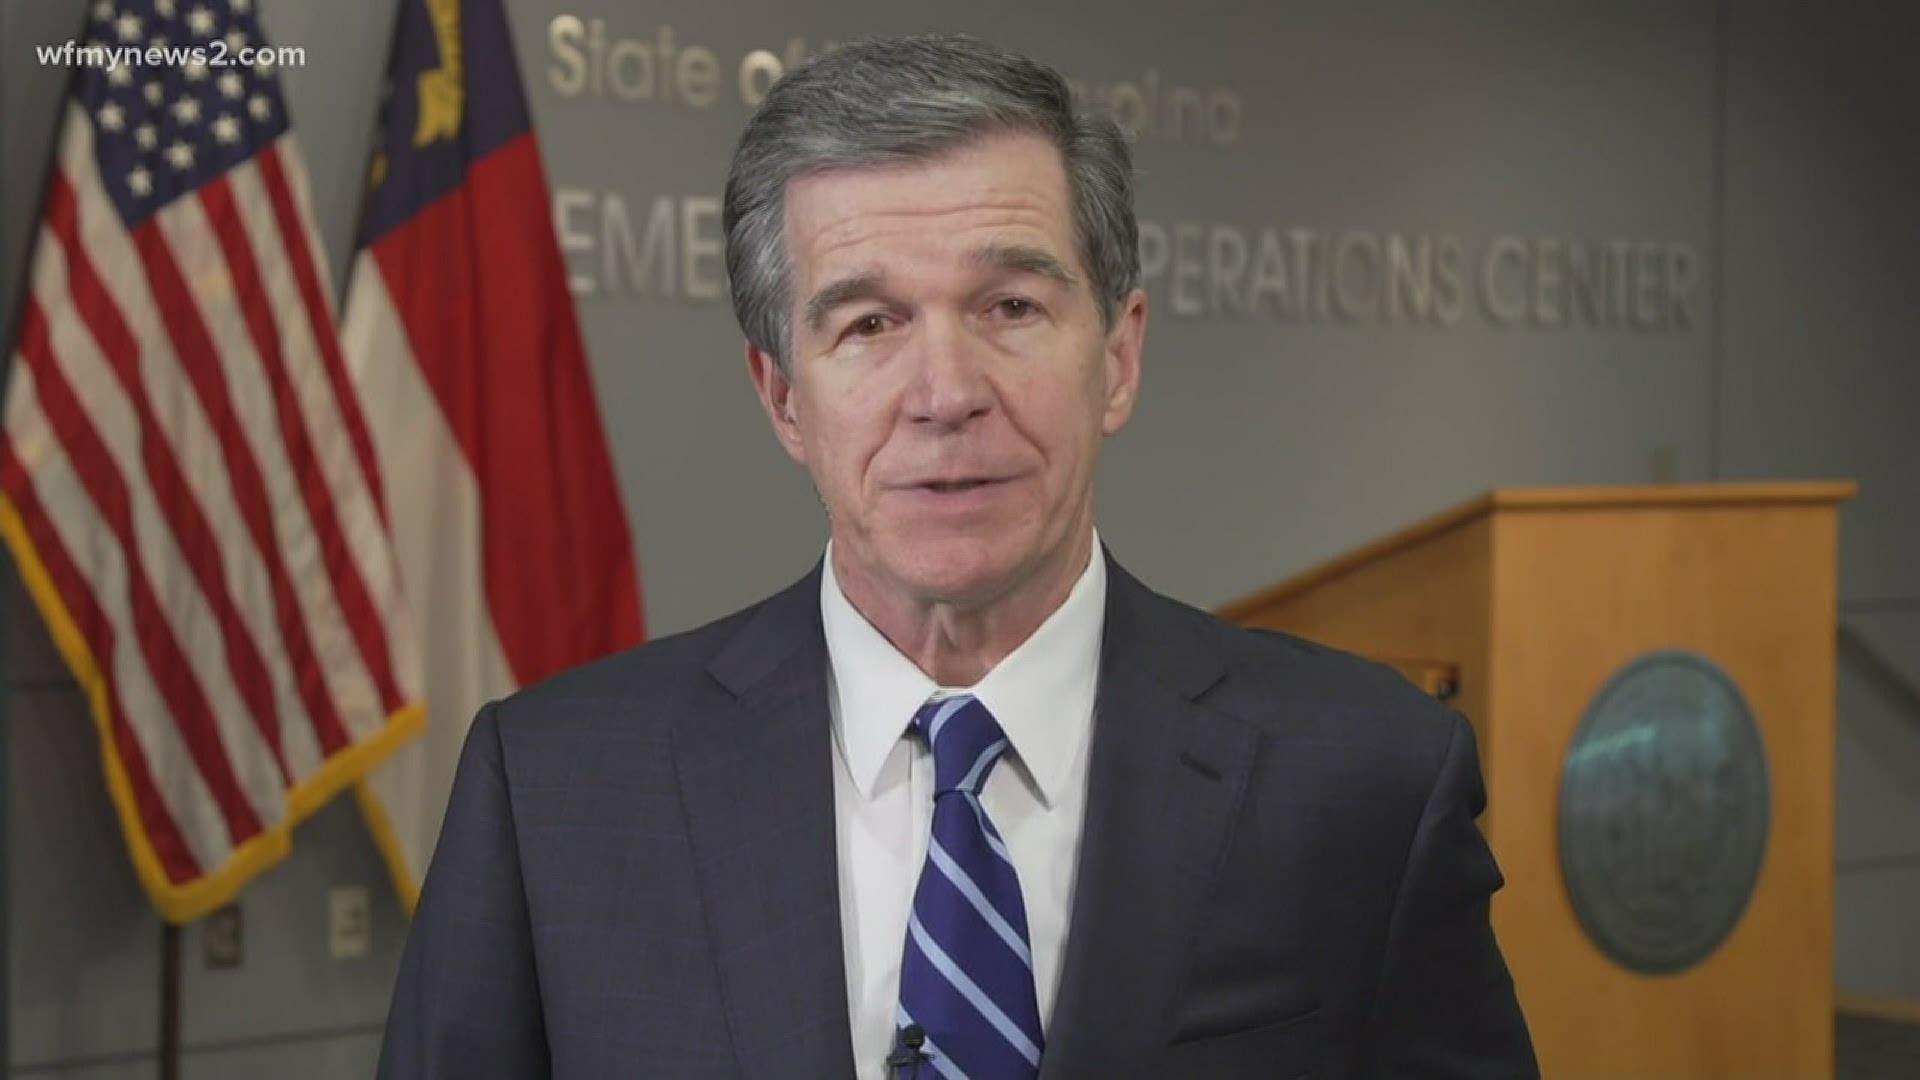 Governor Cooper explained that the next two weeks are critical for social distancing.